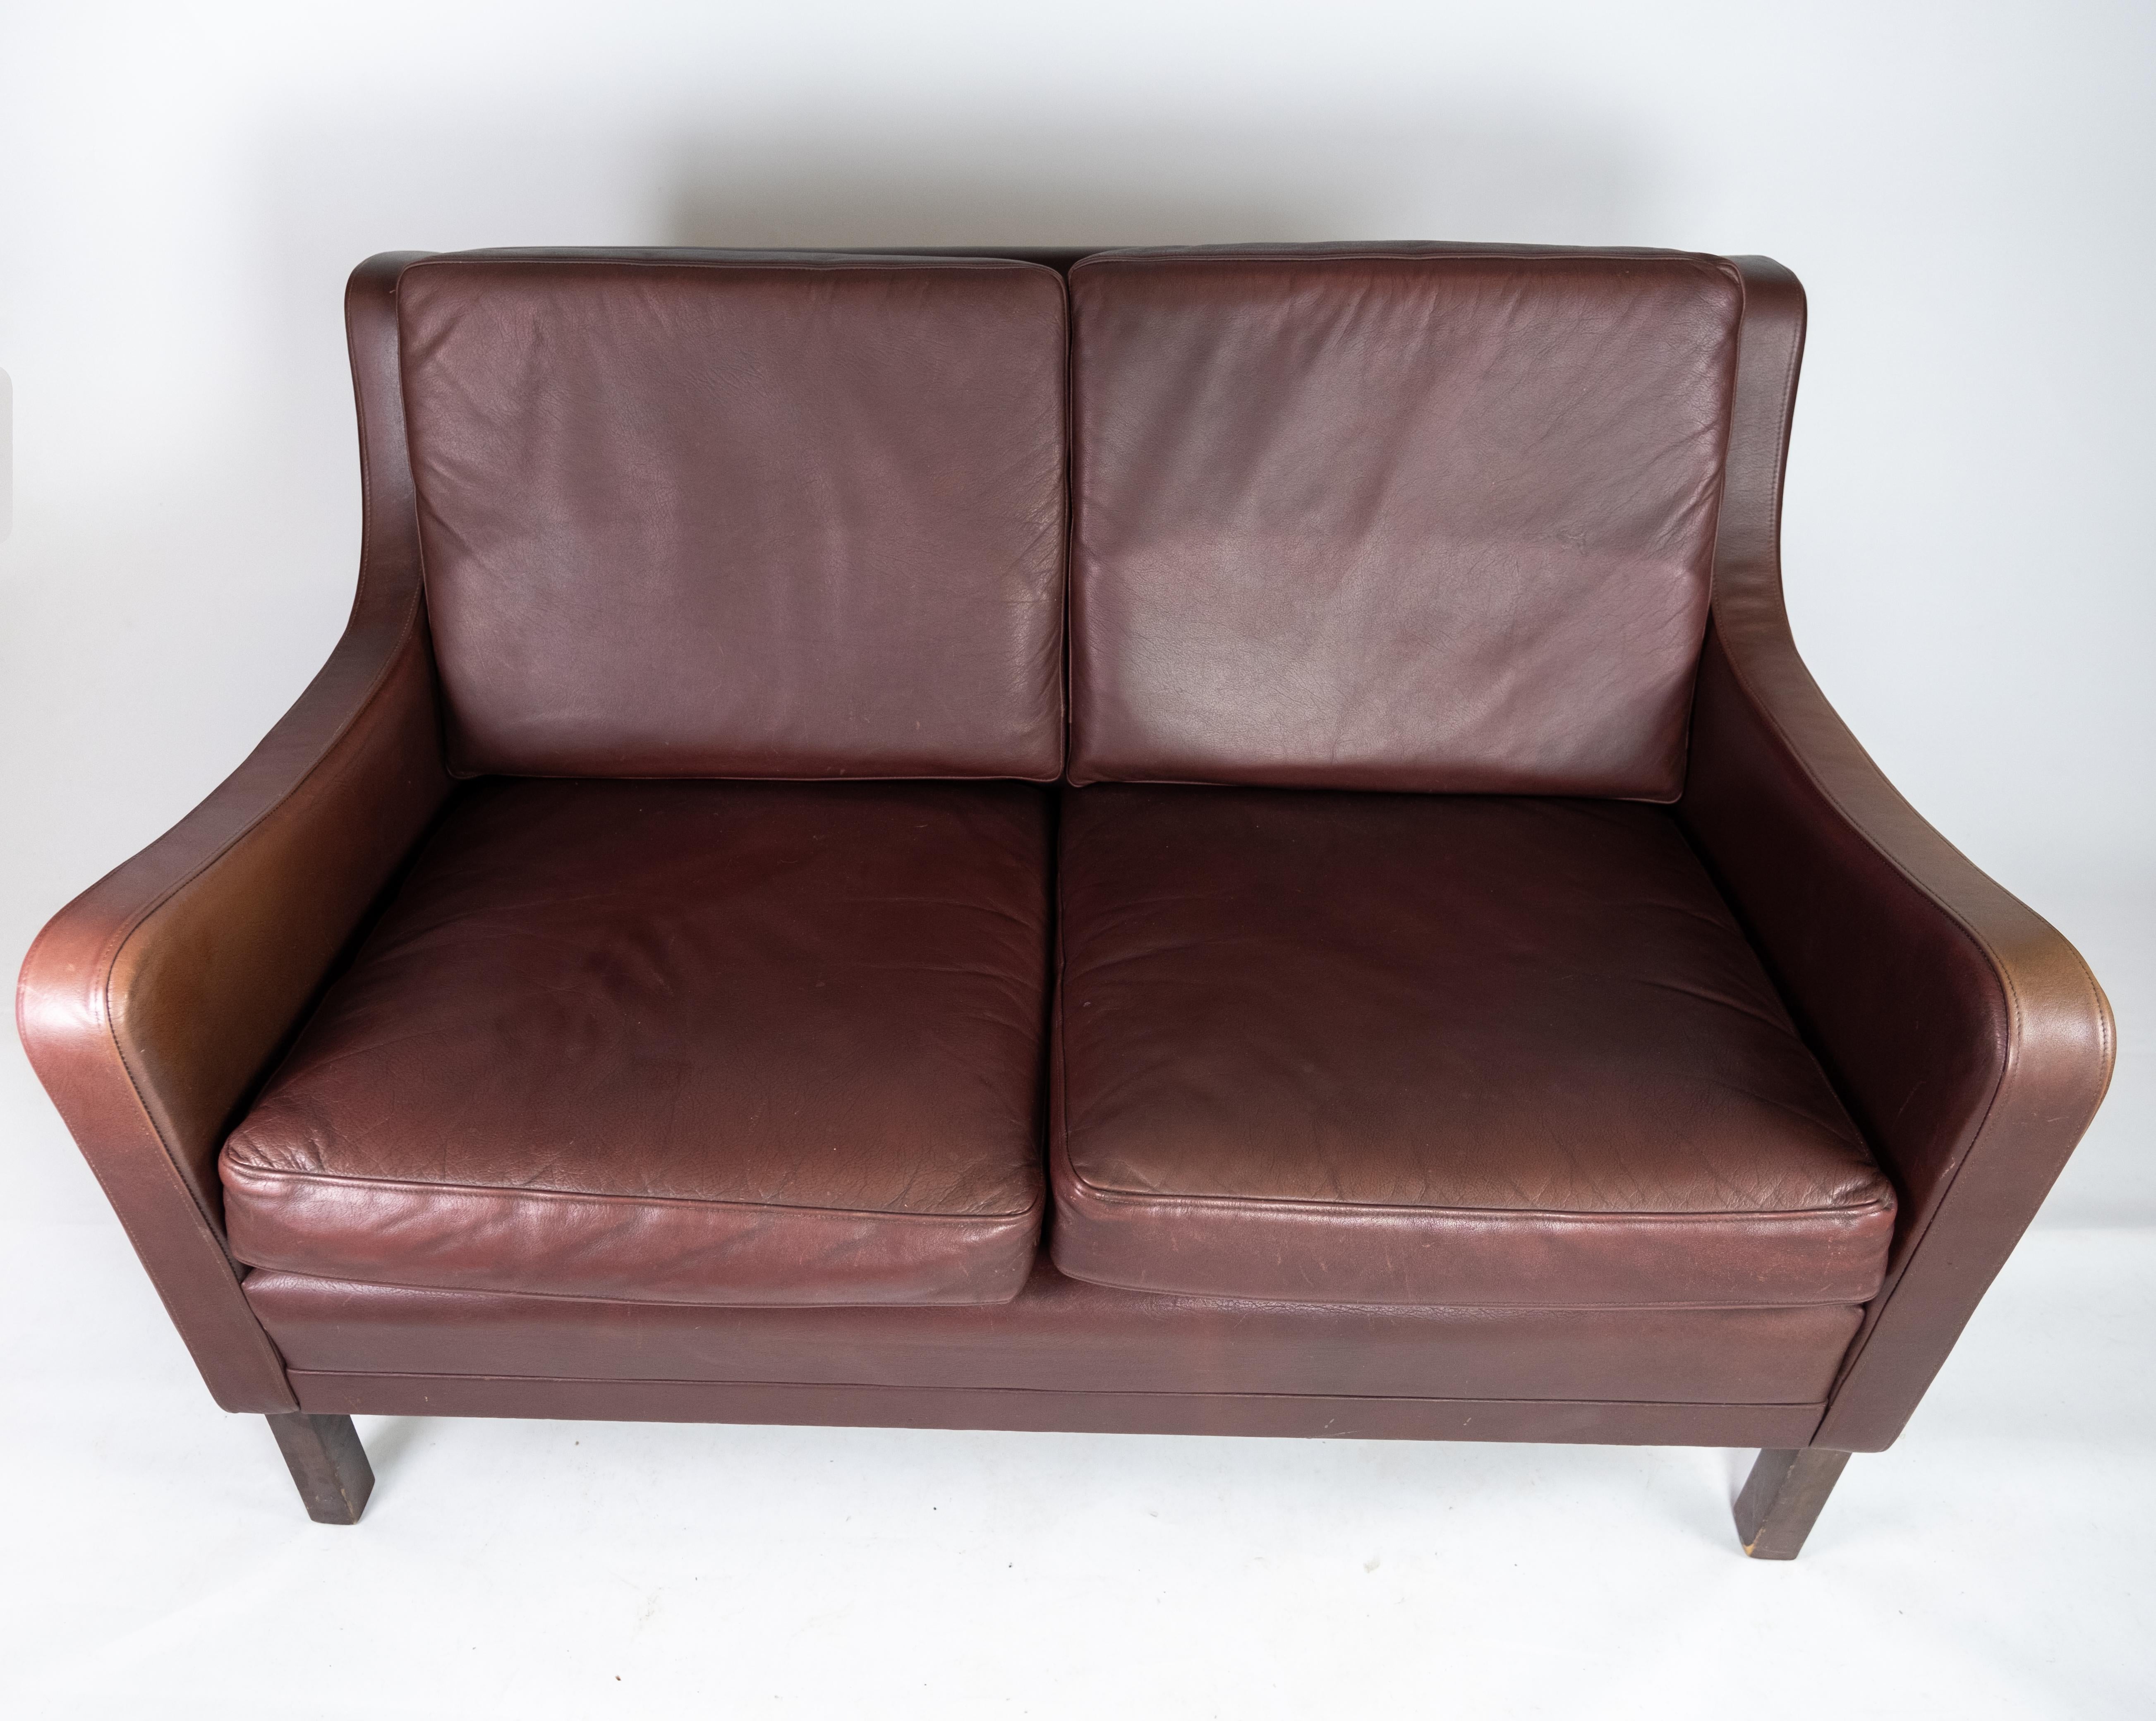 Two-seat sofa, with red brown leather by Stouby Furniture. The sofa is in great vintage condition.